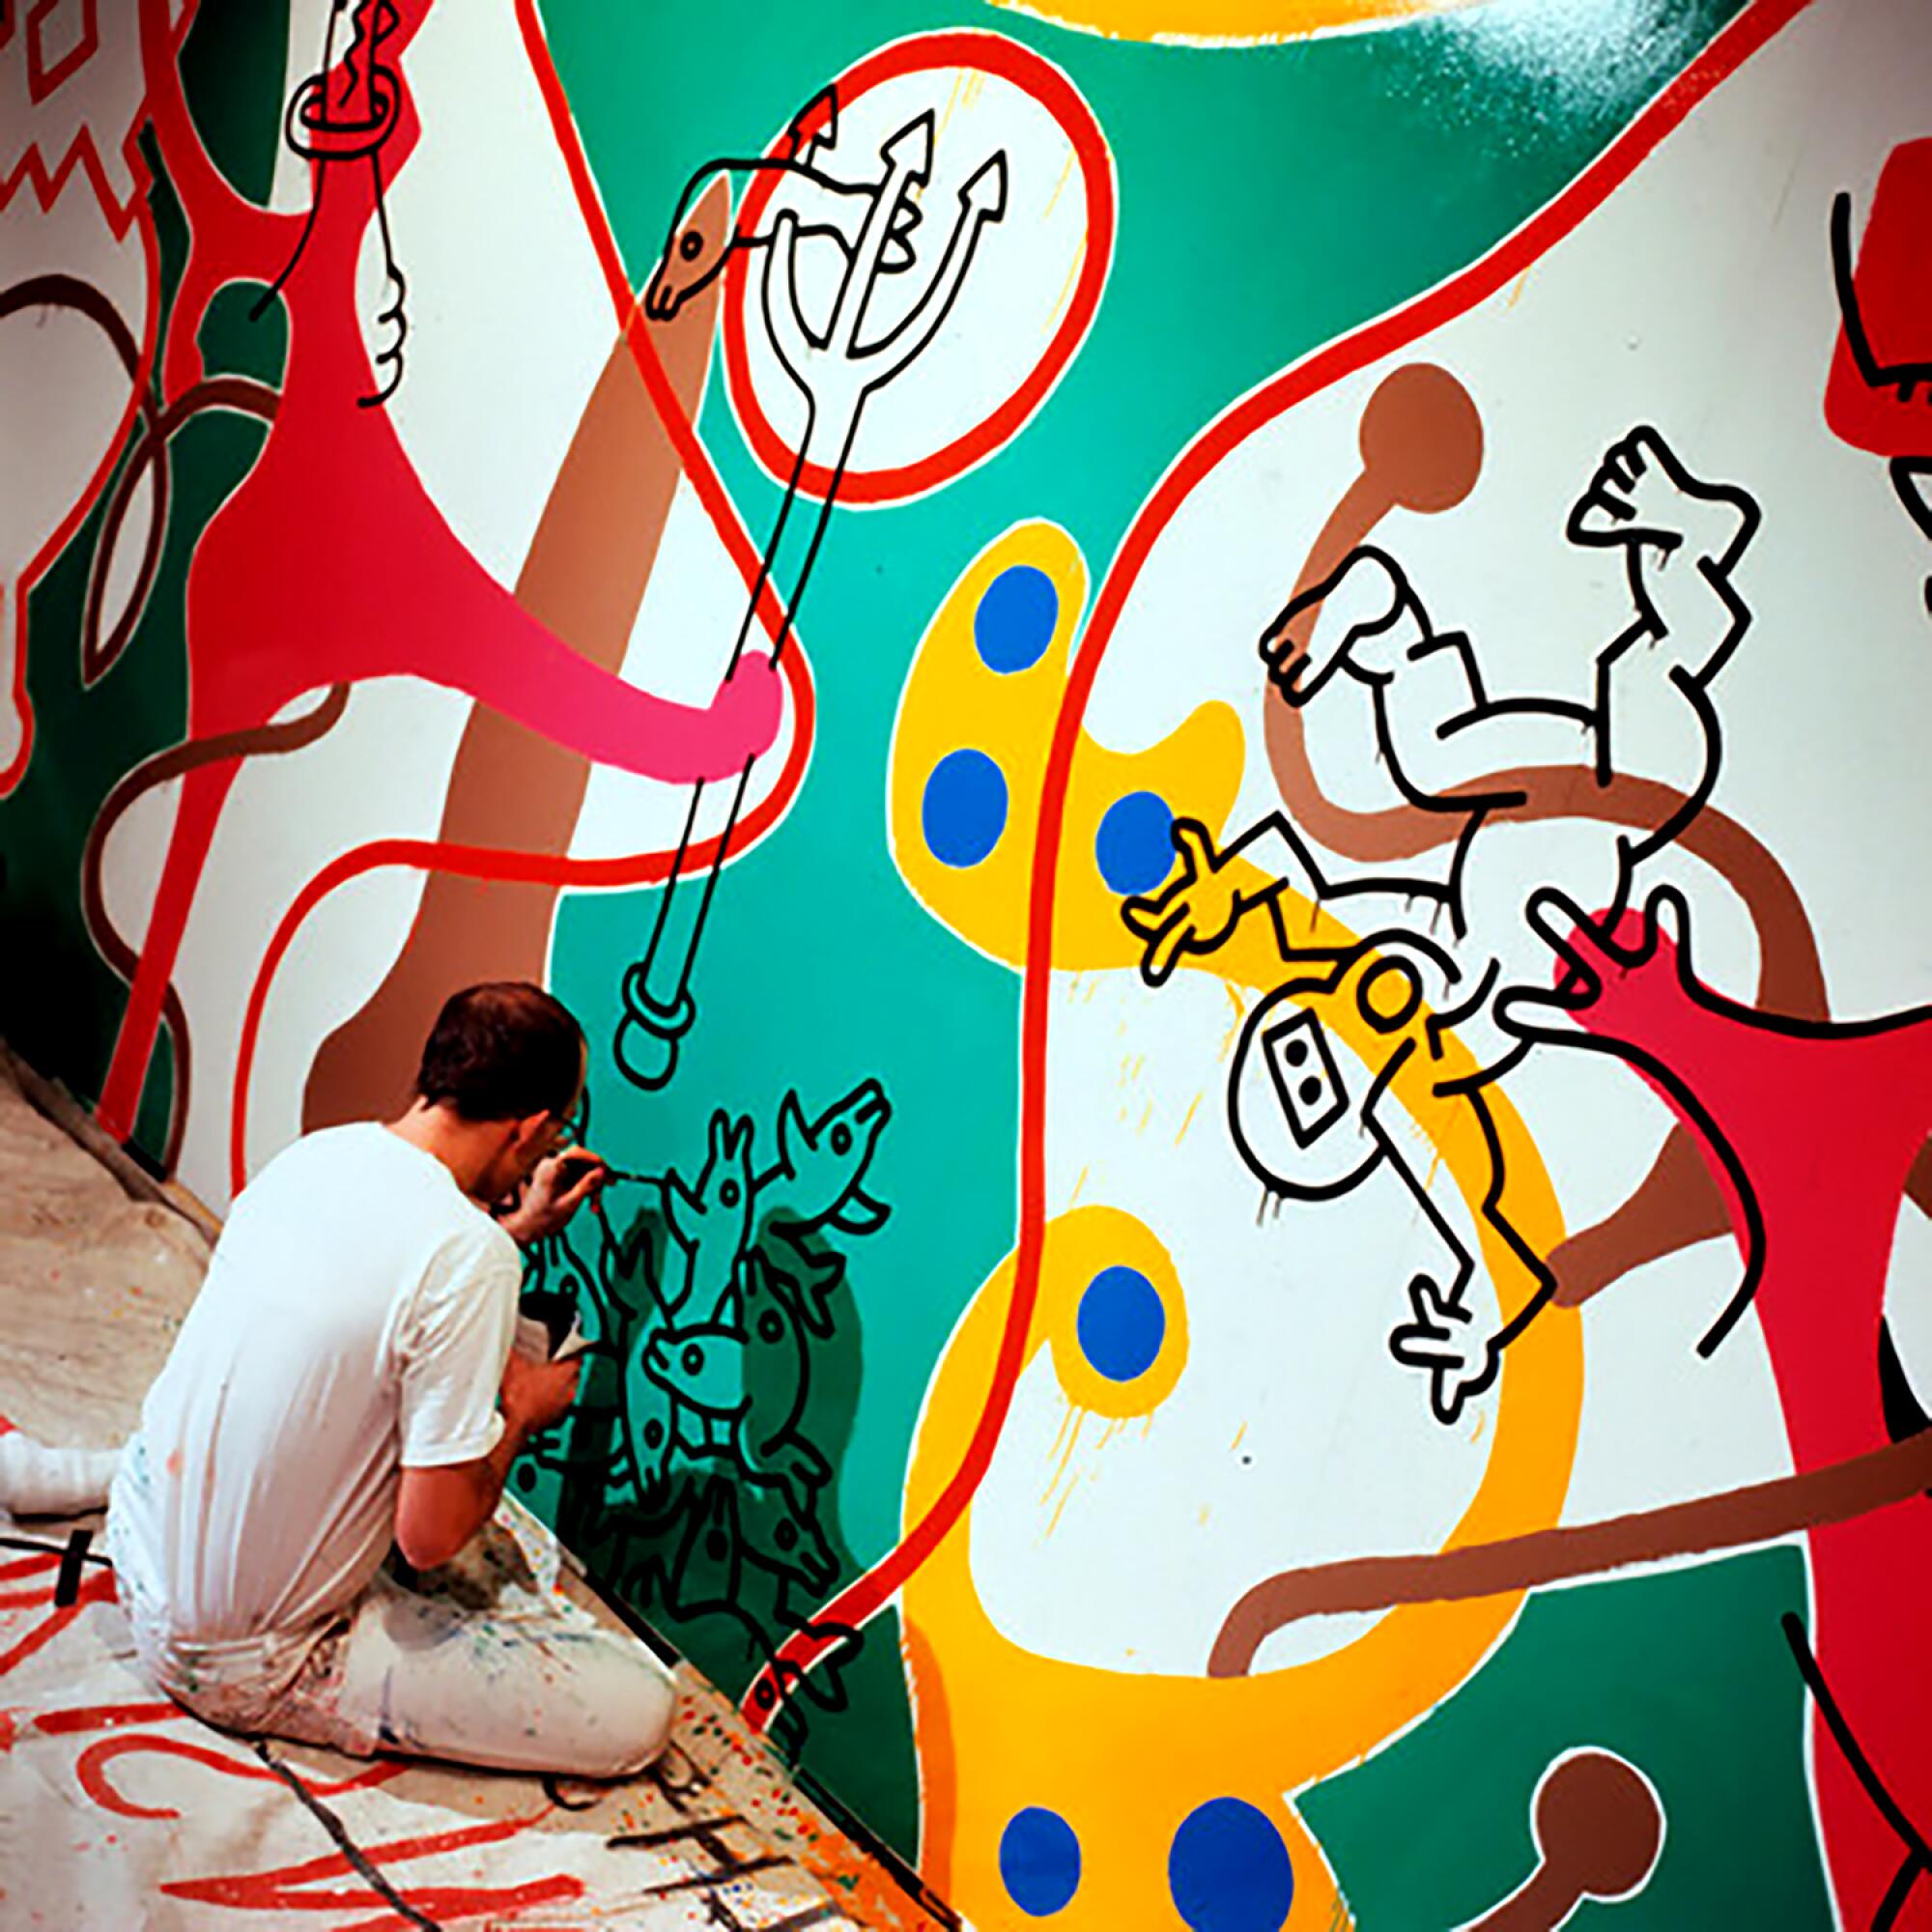 Keith Haring painting a mural at ArtCenter College of Design.